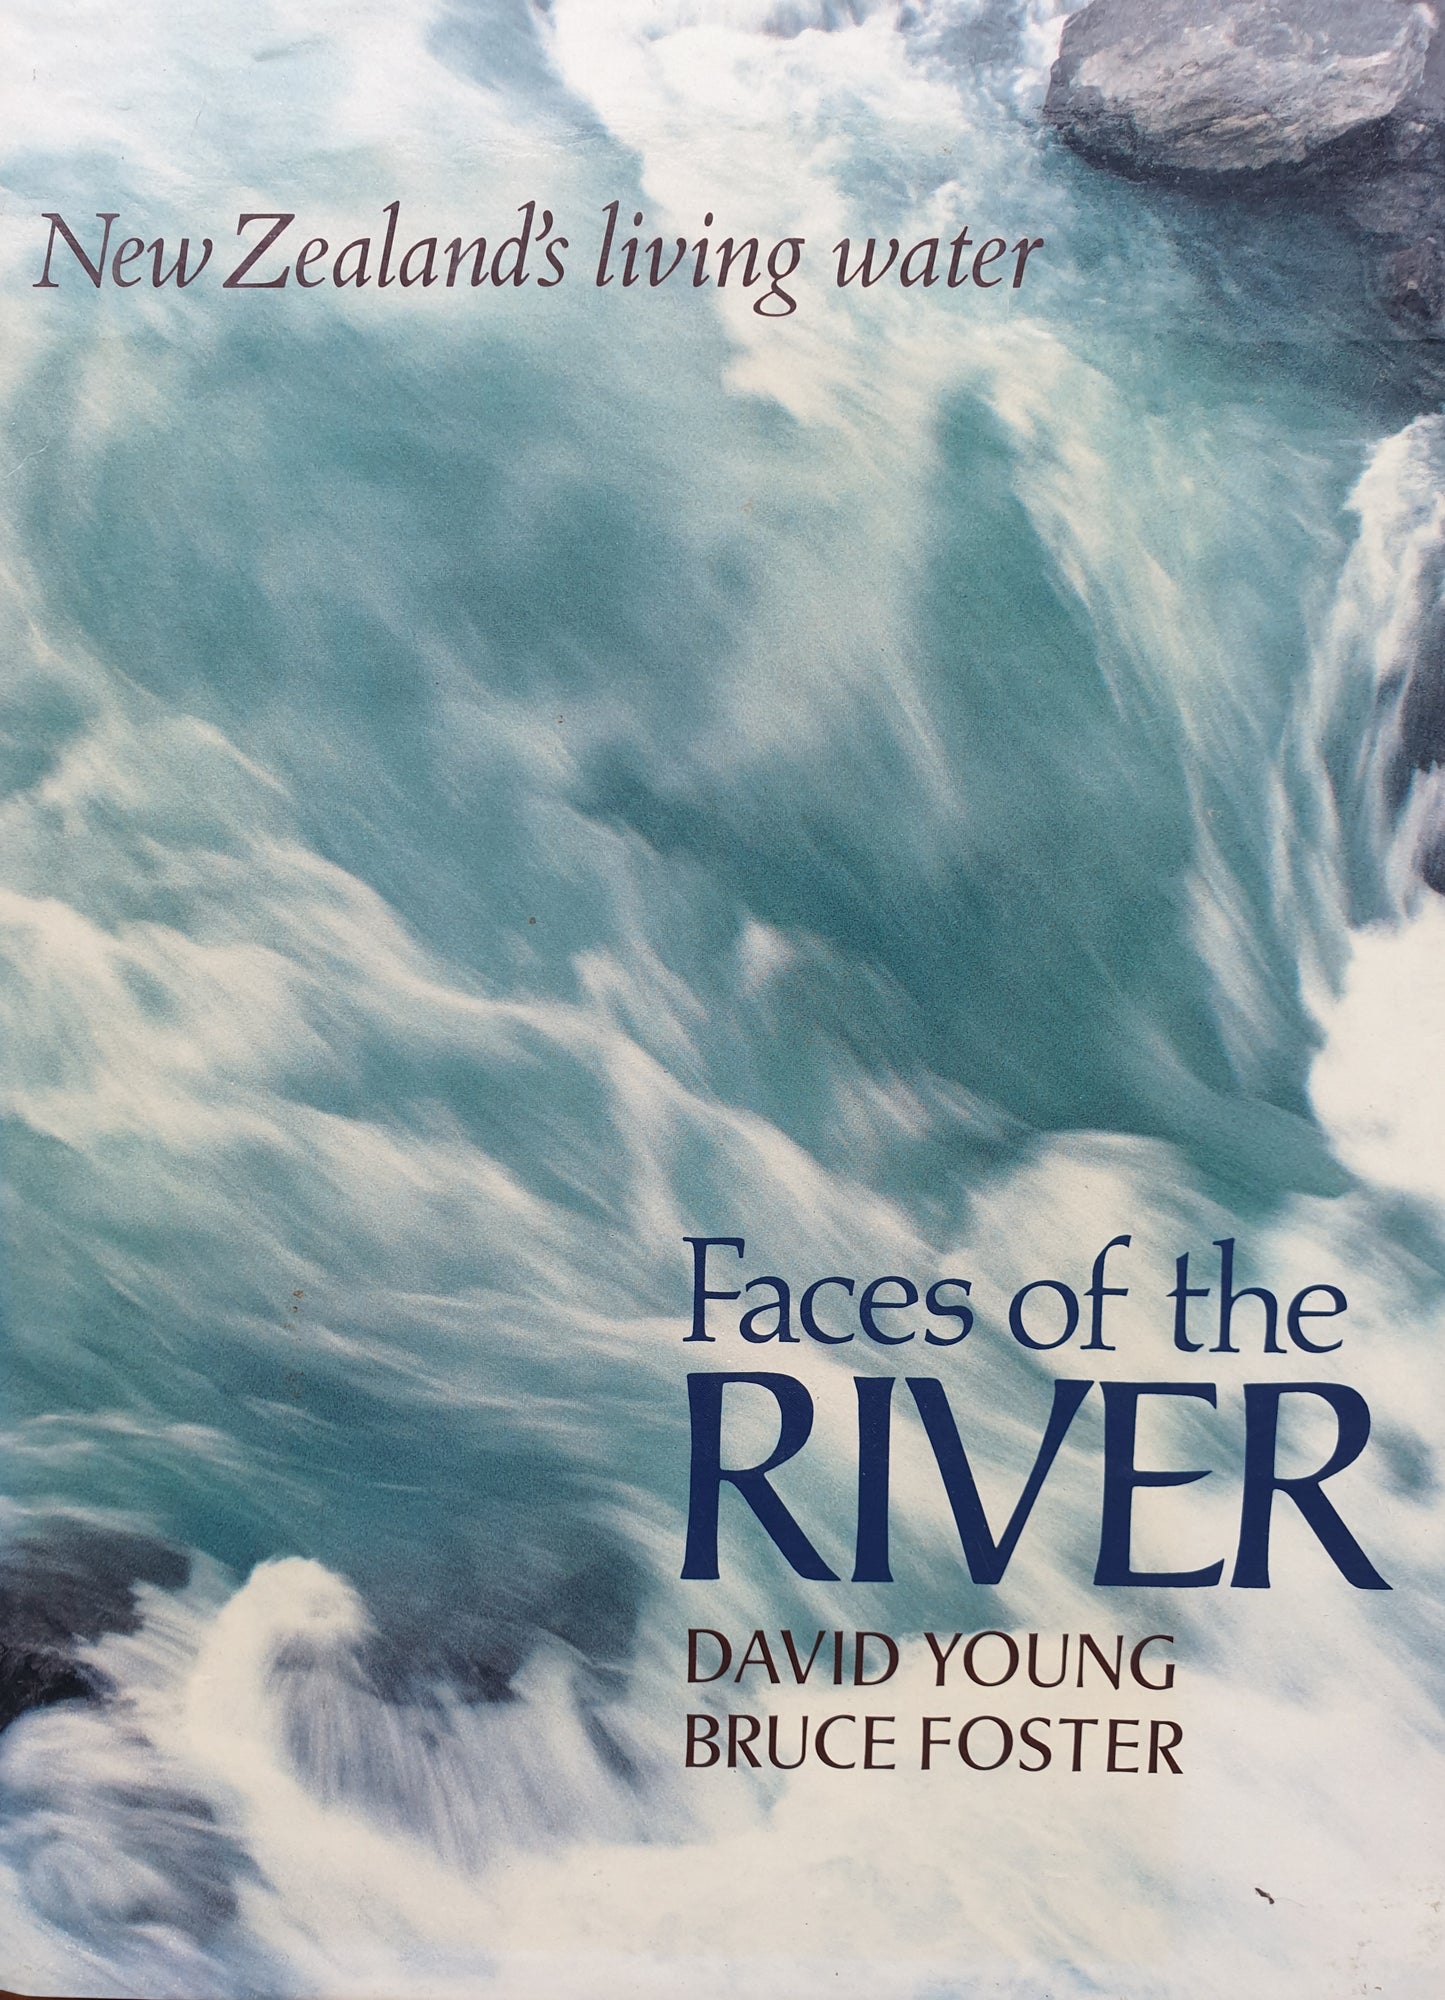 Faces of the river